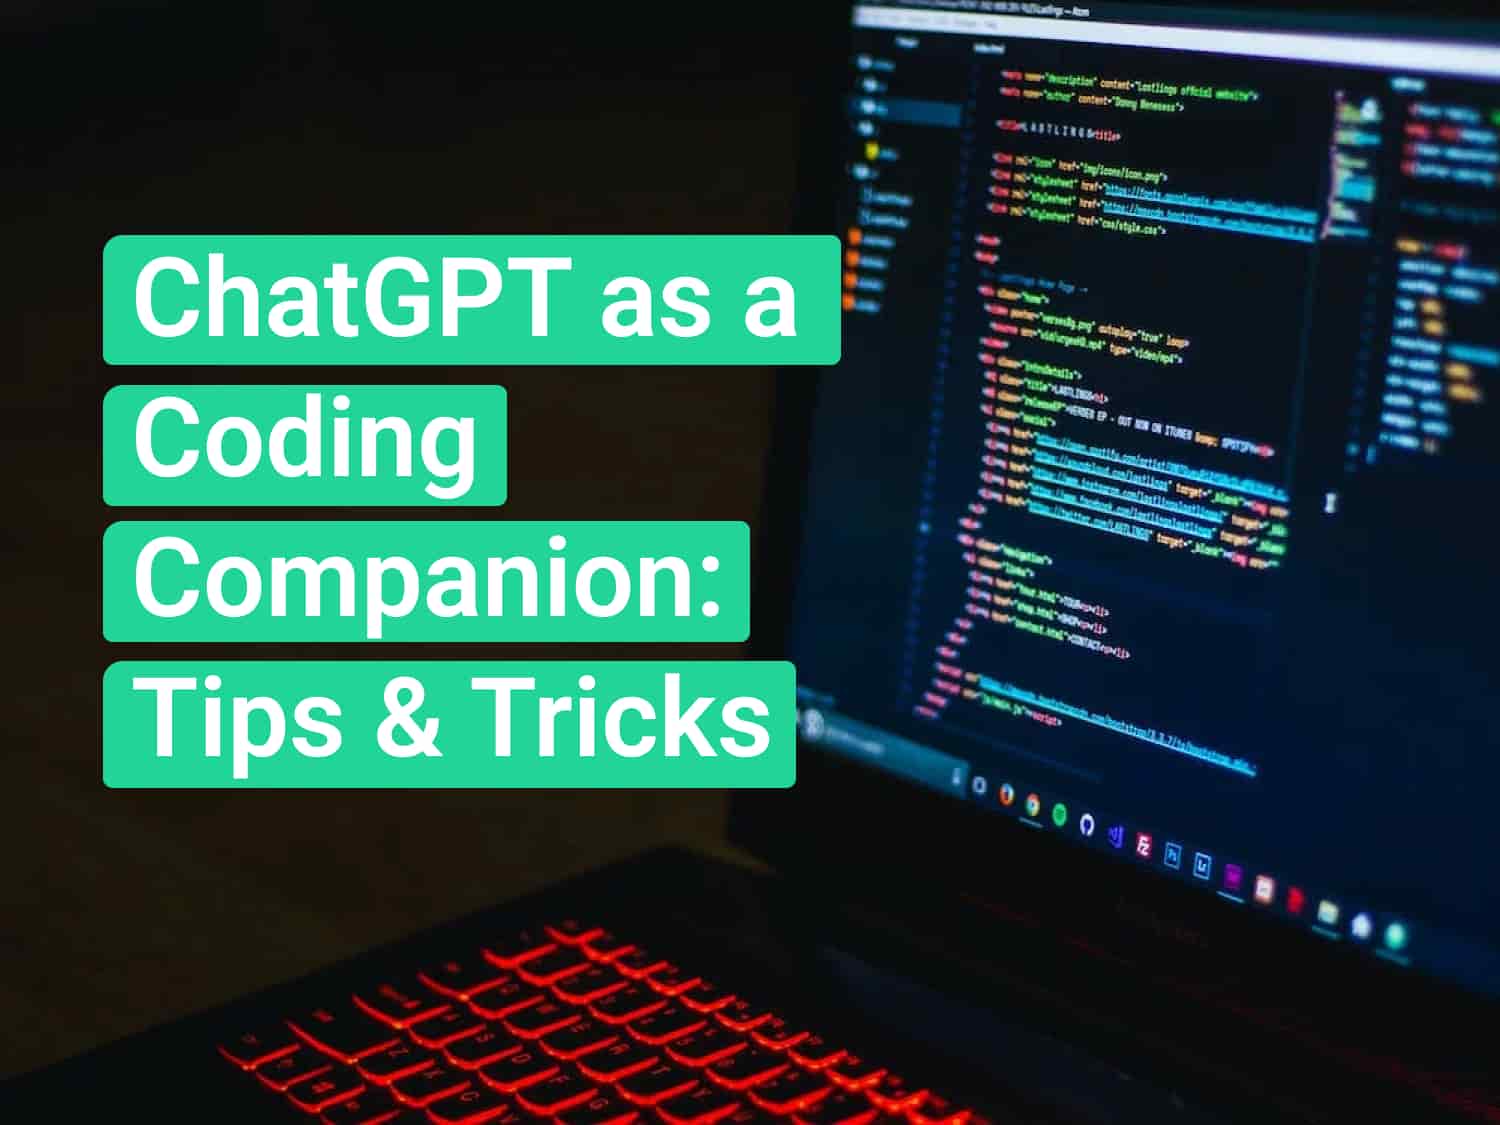 How to use ChatGPT for coding